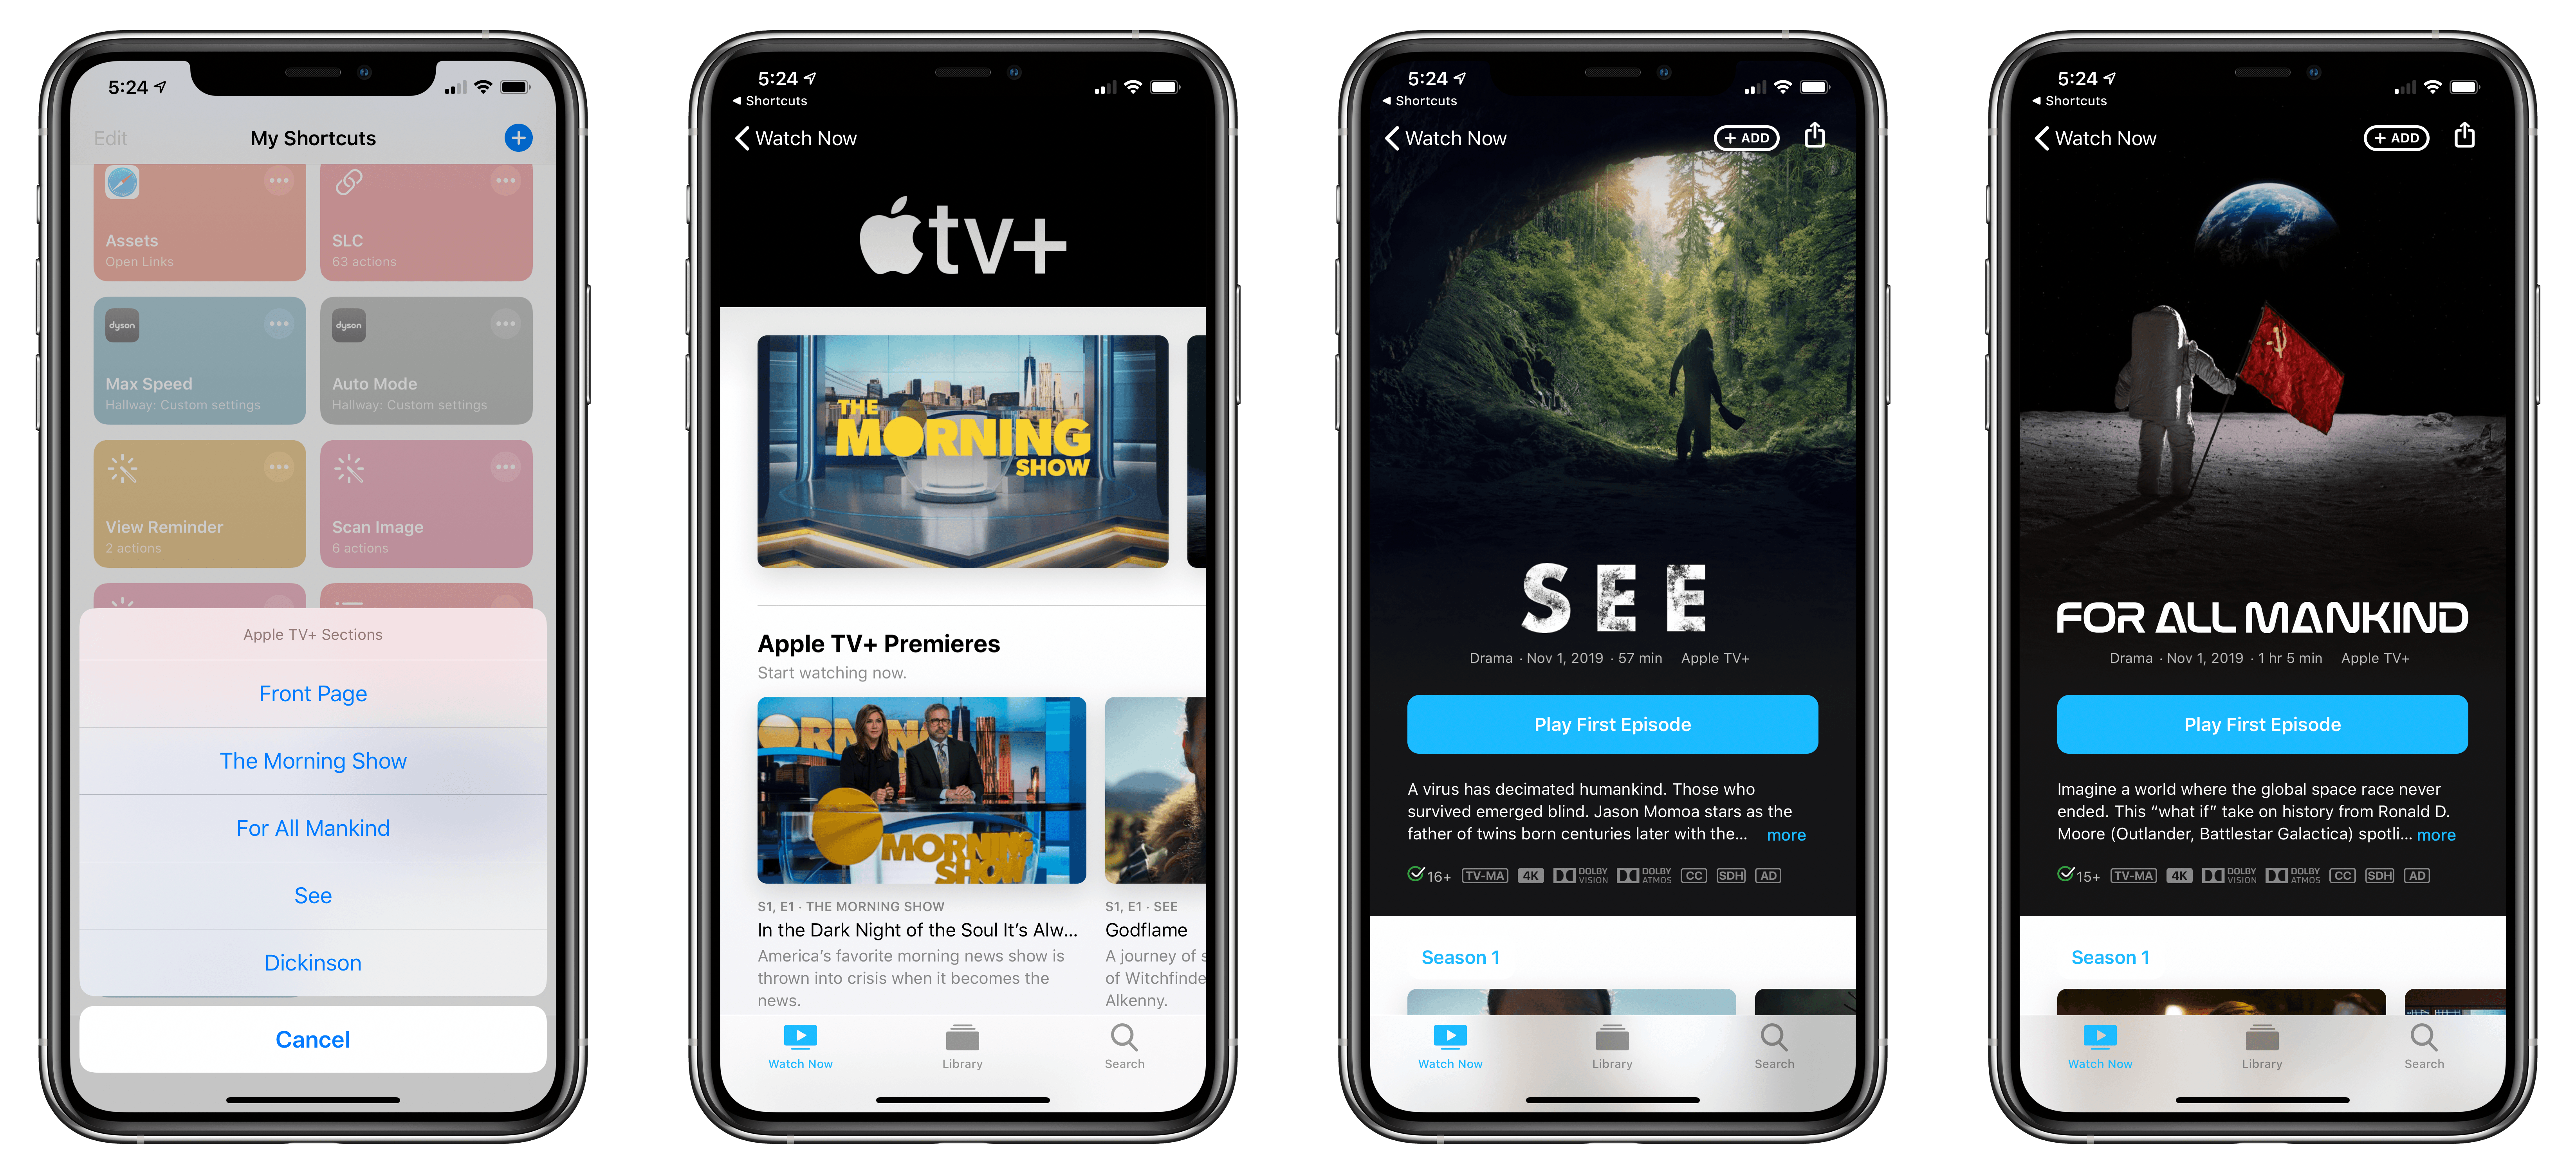 The Apple TV+ launcher supports the Apple TV+ front page as well as individual shows.